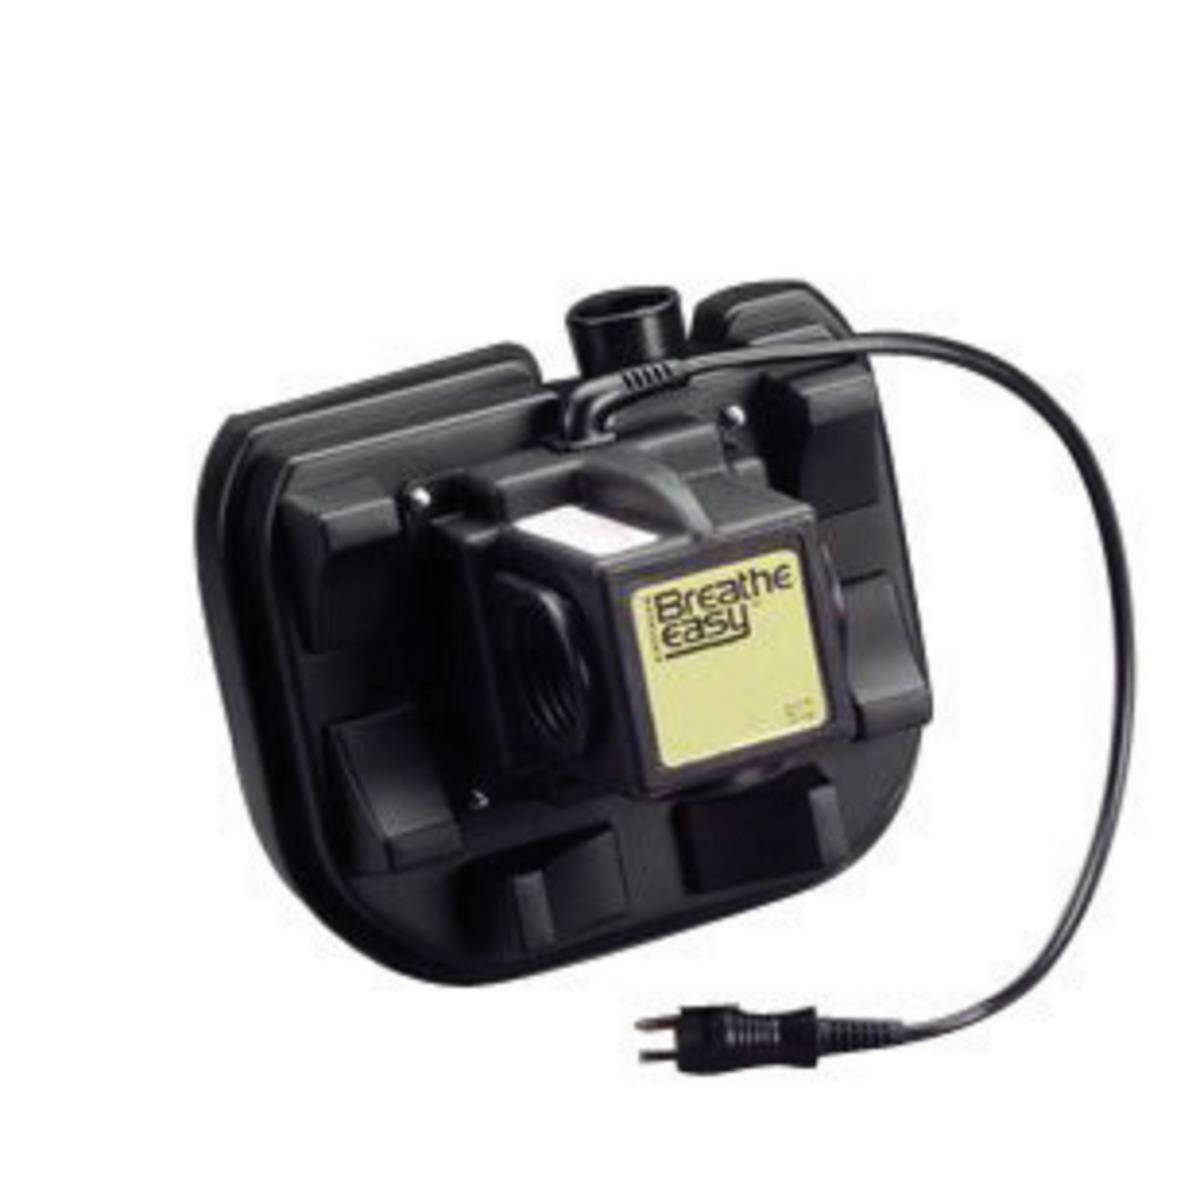 3M™ Breathe Easy™ Powered Air Purifying Respirator Unit (Availability restrictions apply.)